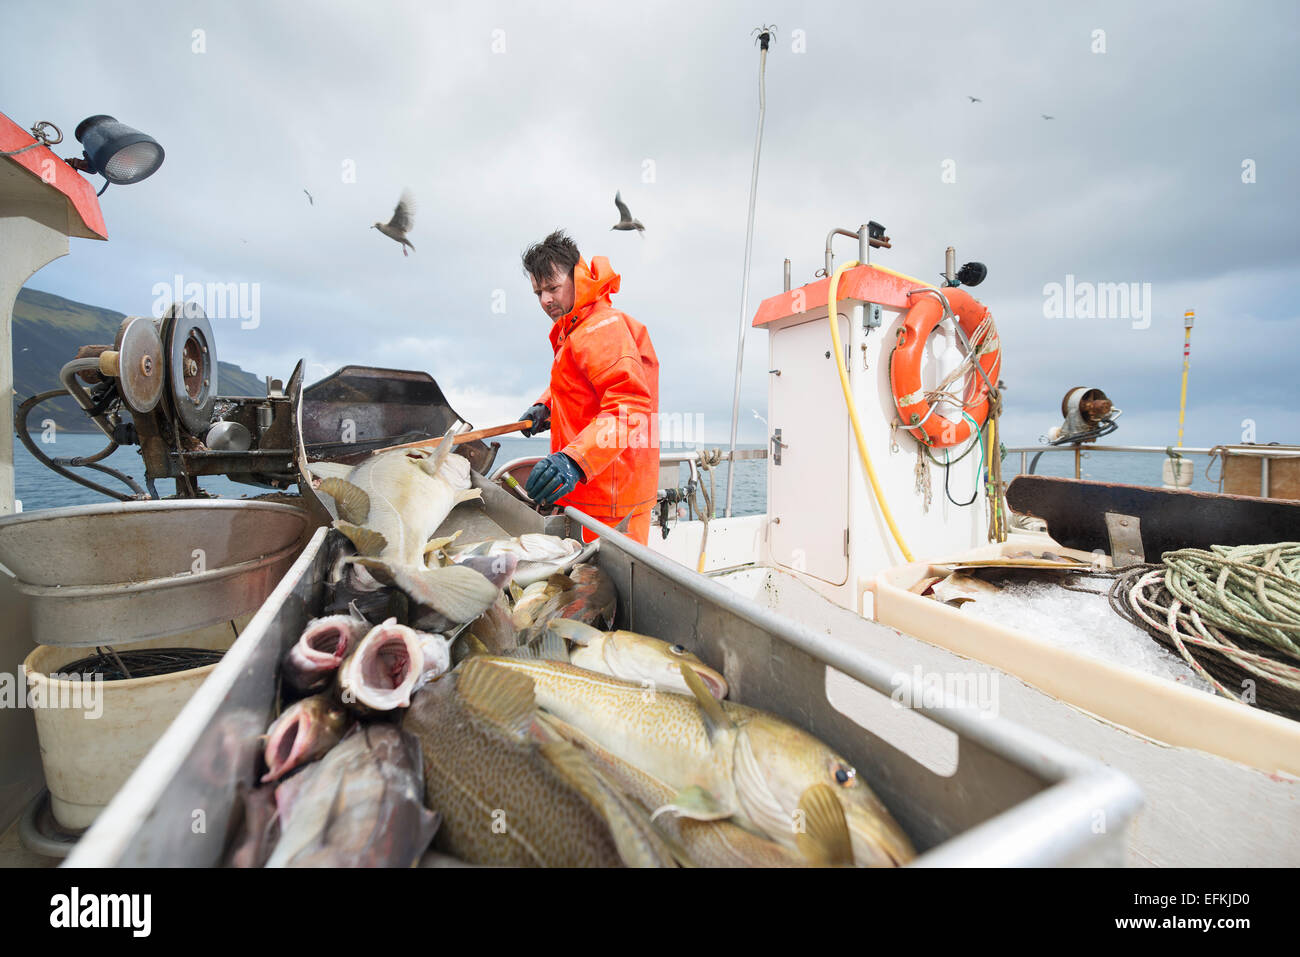 Fisherman working on boat with fresh fish in foreground Stock Photo